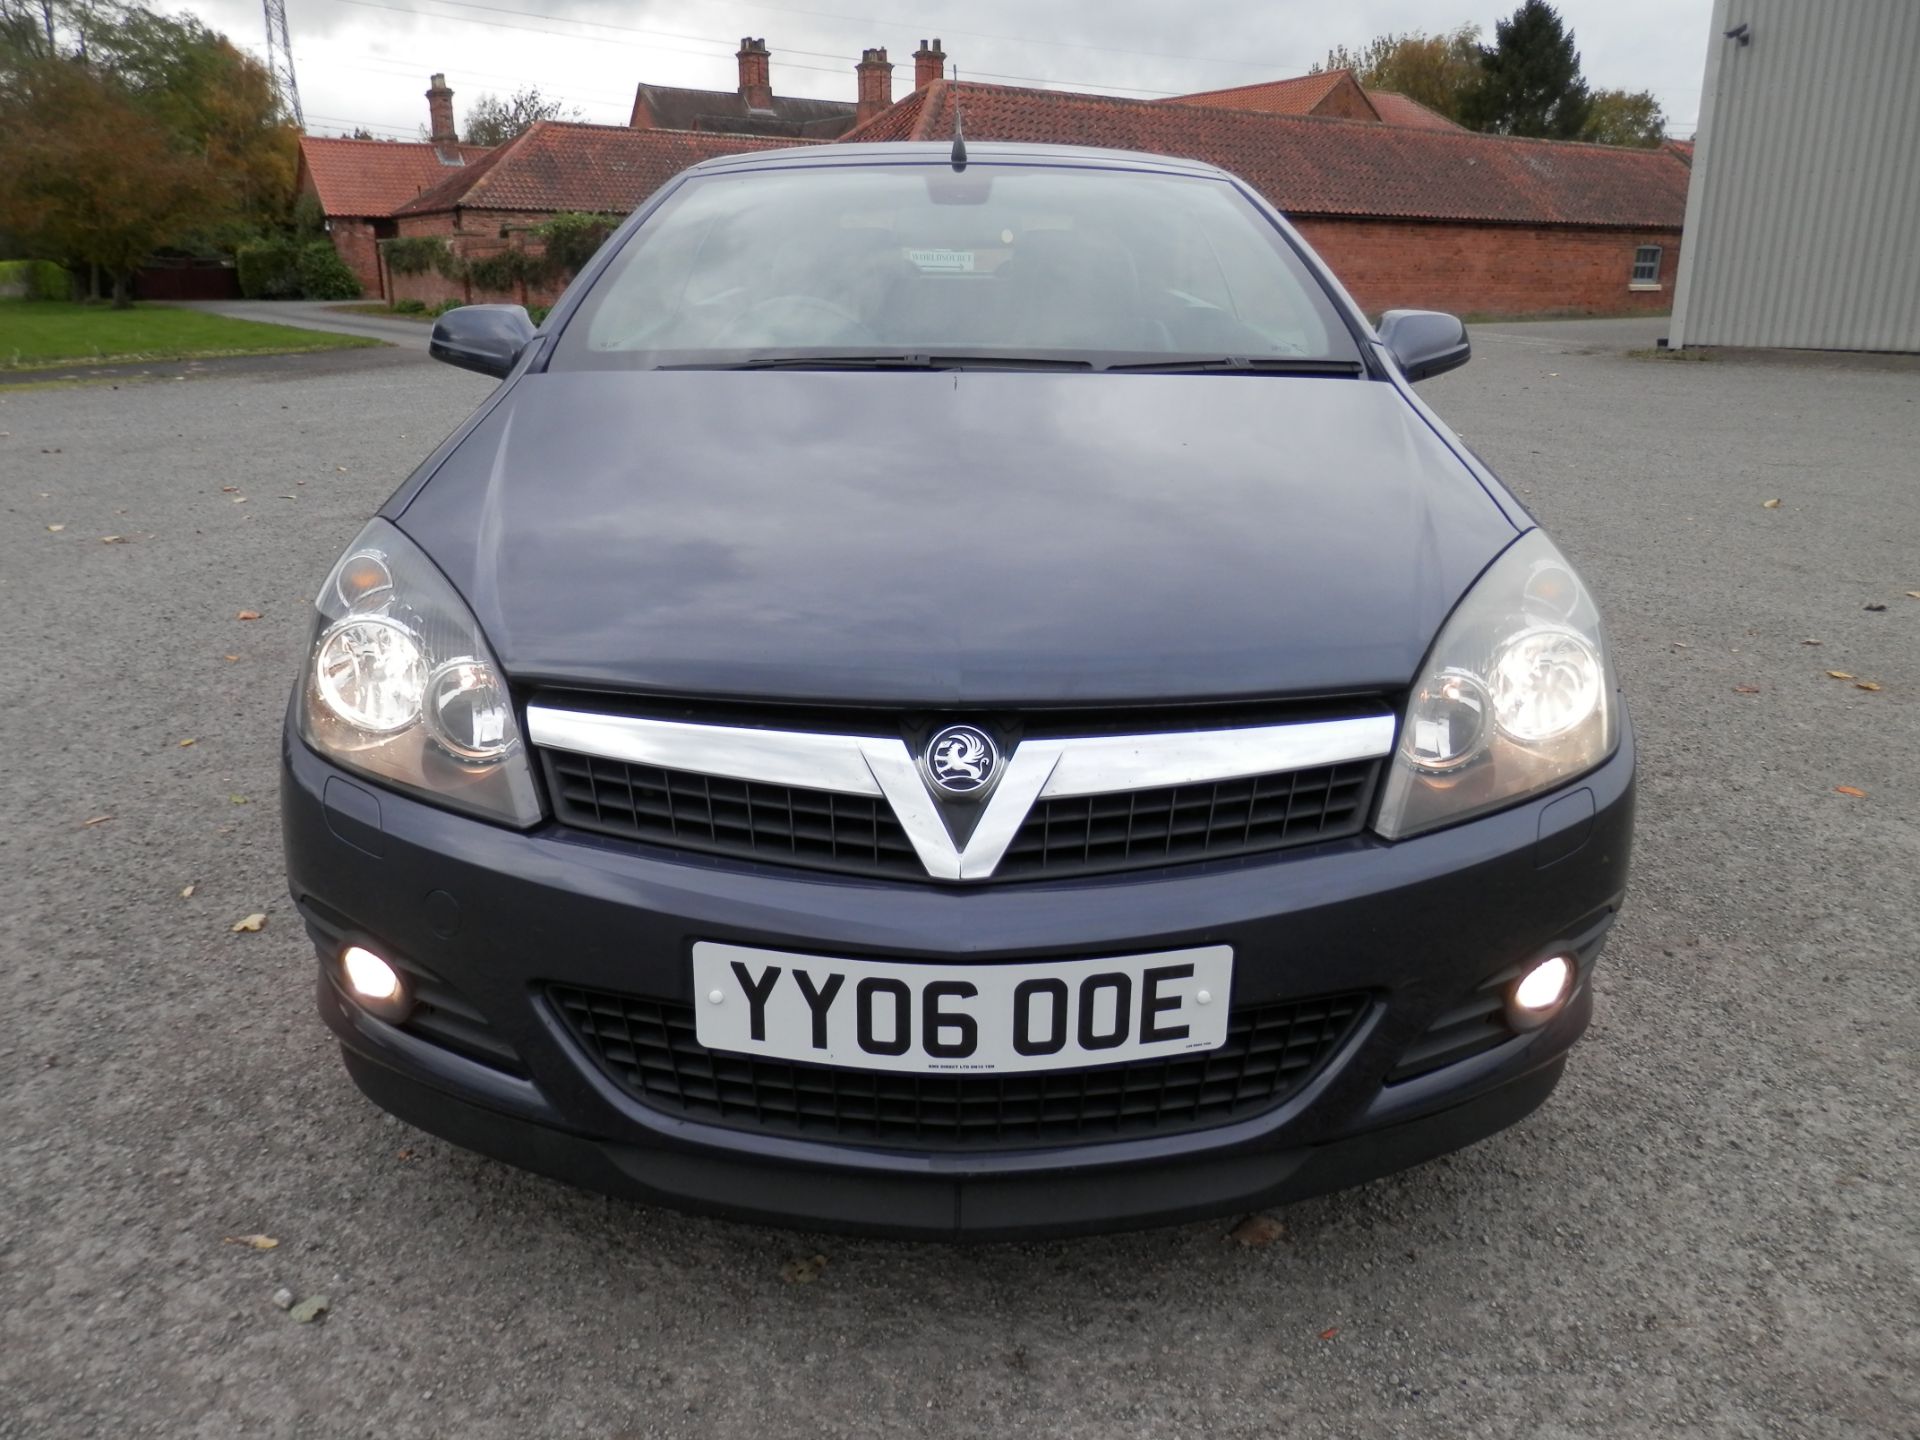 2006/06 VAUXHALL ASTRA DESIGN 1.8 SPORT TWIN TOP CONVERTIBLE, ONLY 62K MILES WARRANTED, MOT FEB 2017 - Image 7 of 25